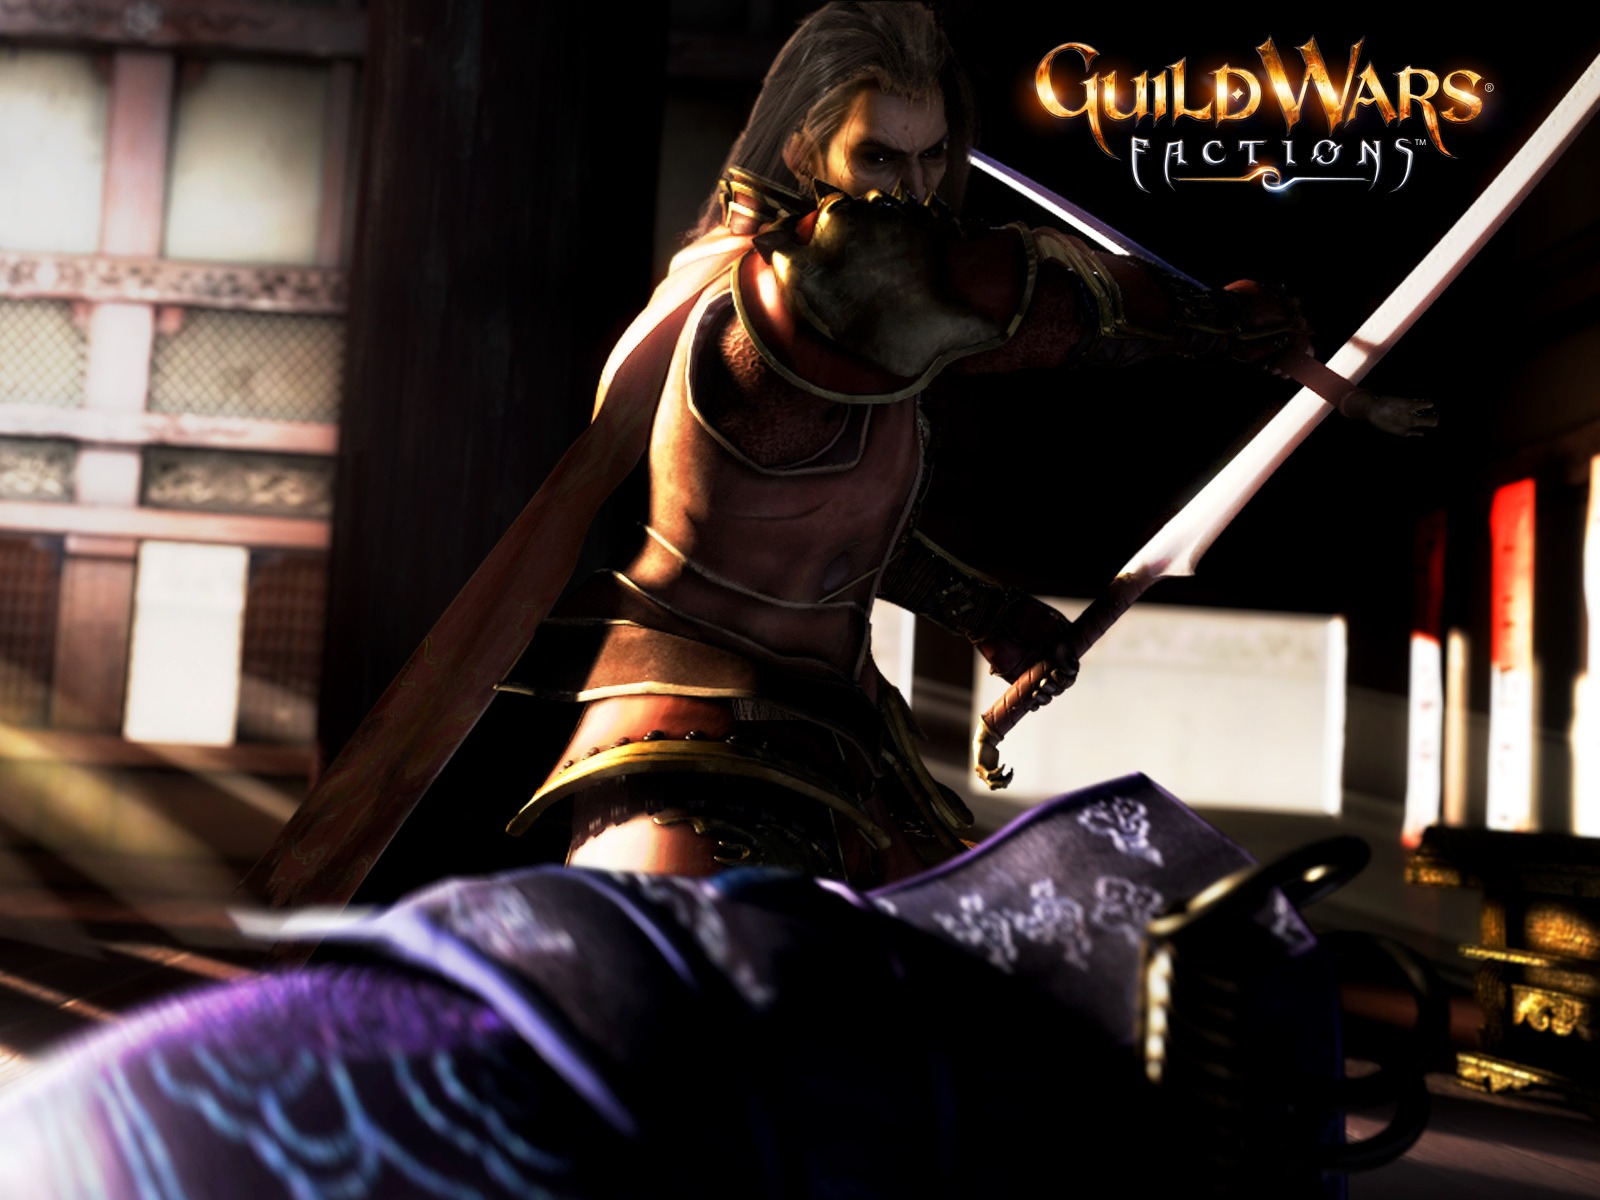 Guildwars tapety (2) #17 - 1600x1200